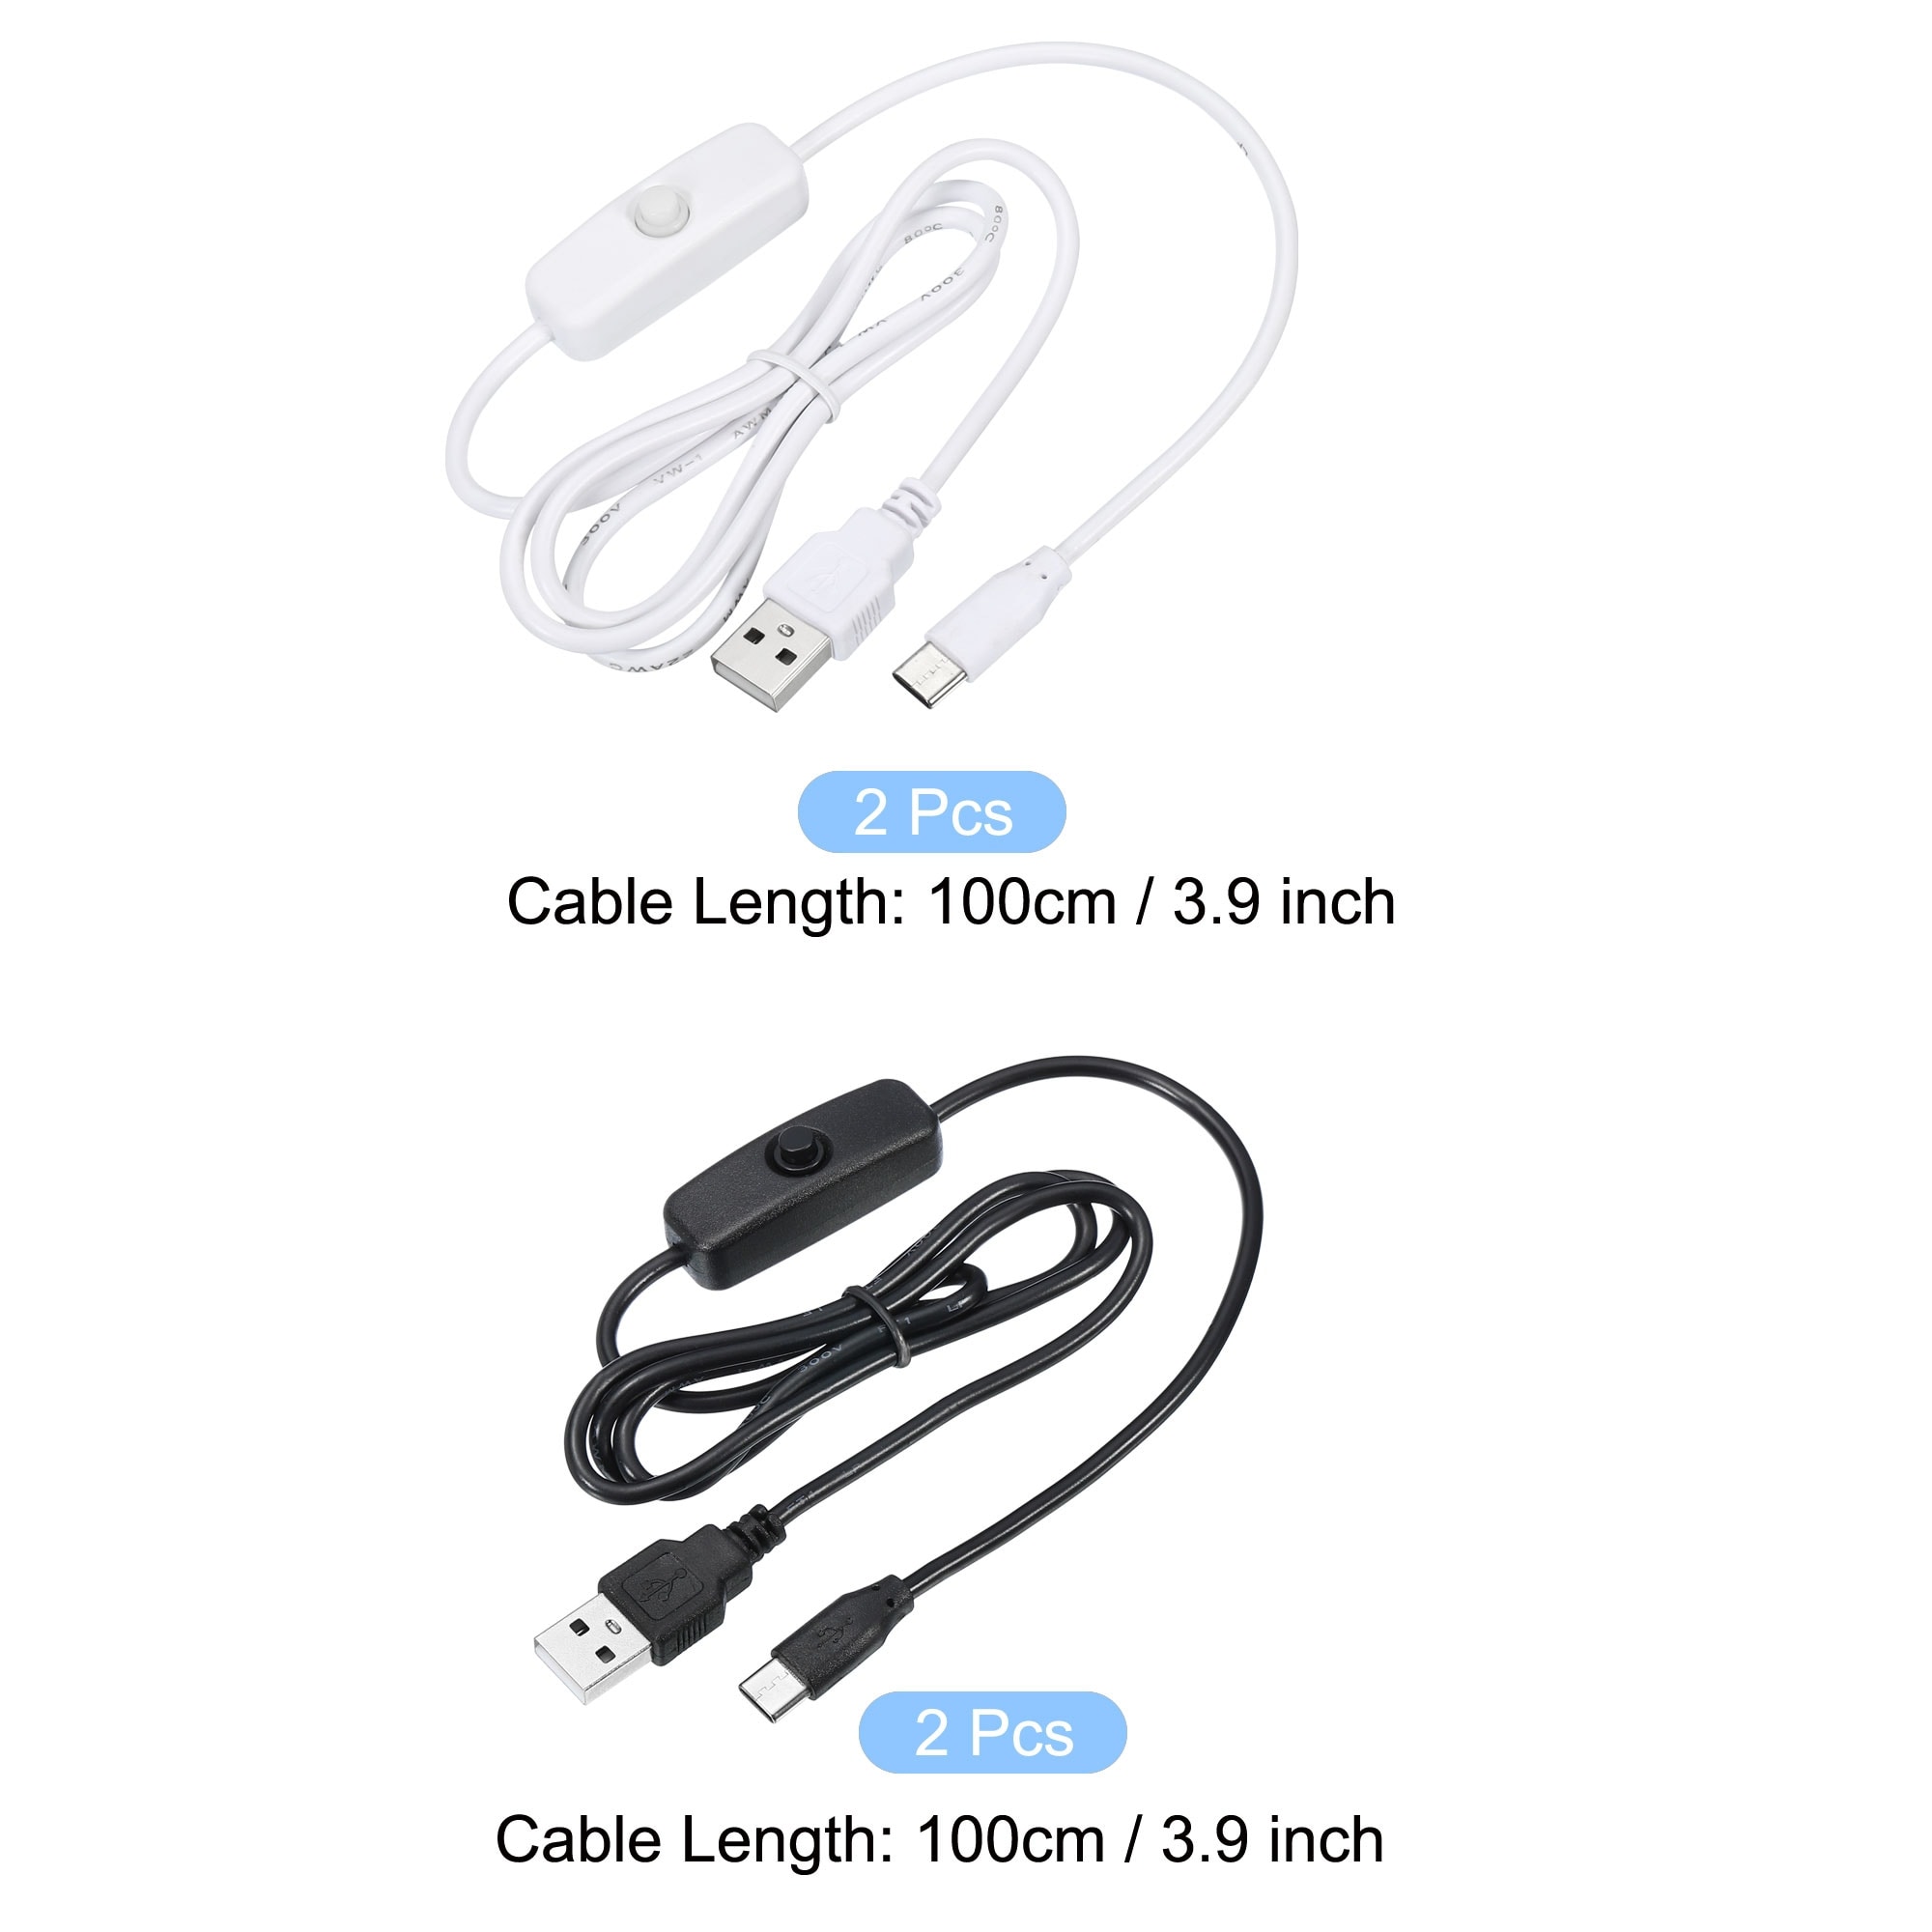 USB Male to USB Type C Male Power Cable 100cm with 501 Switch 1 Set - Black, White